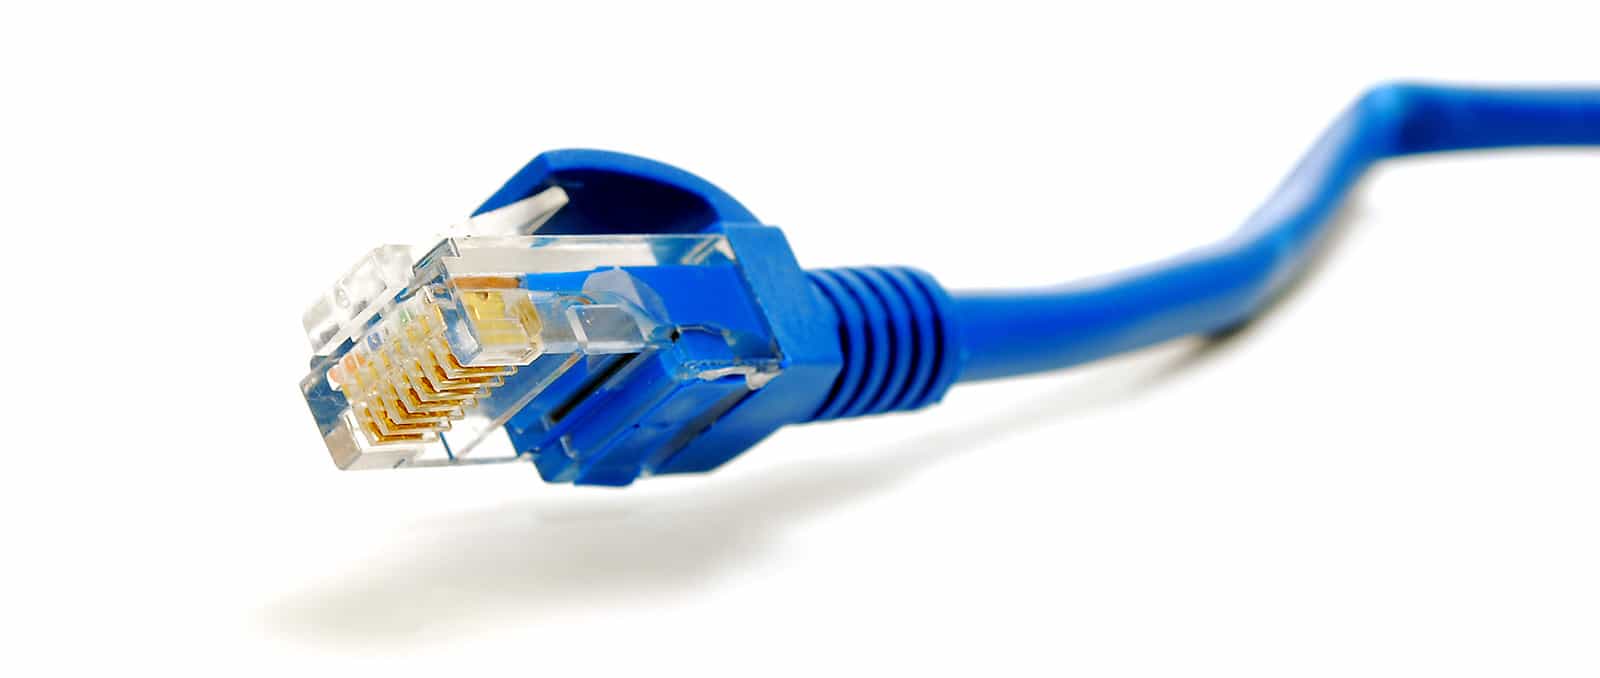 am i connected to wifi or ethernet